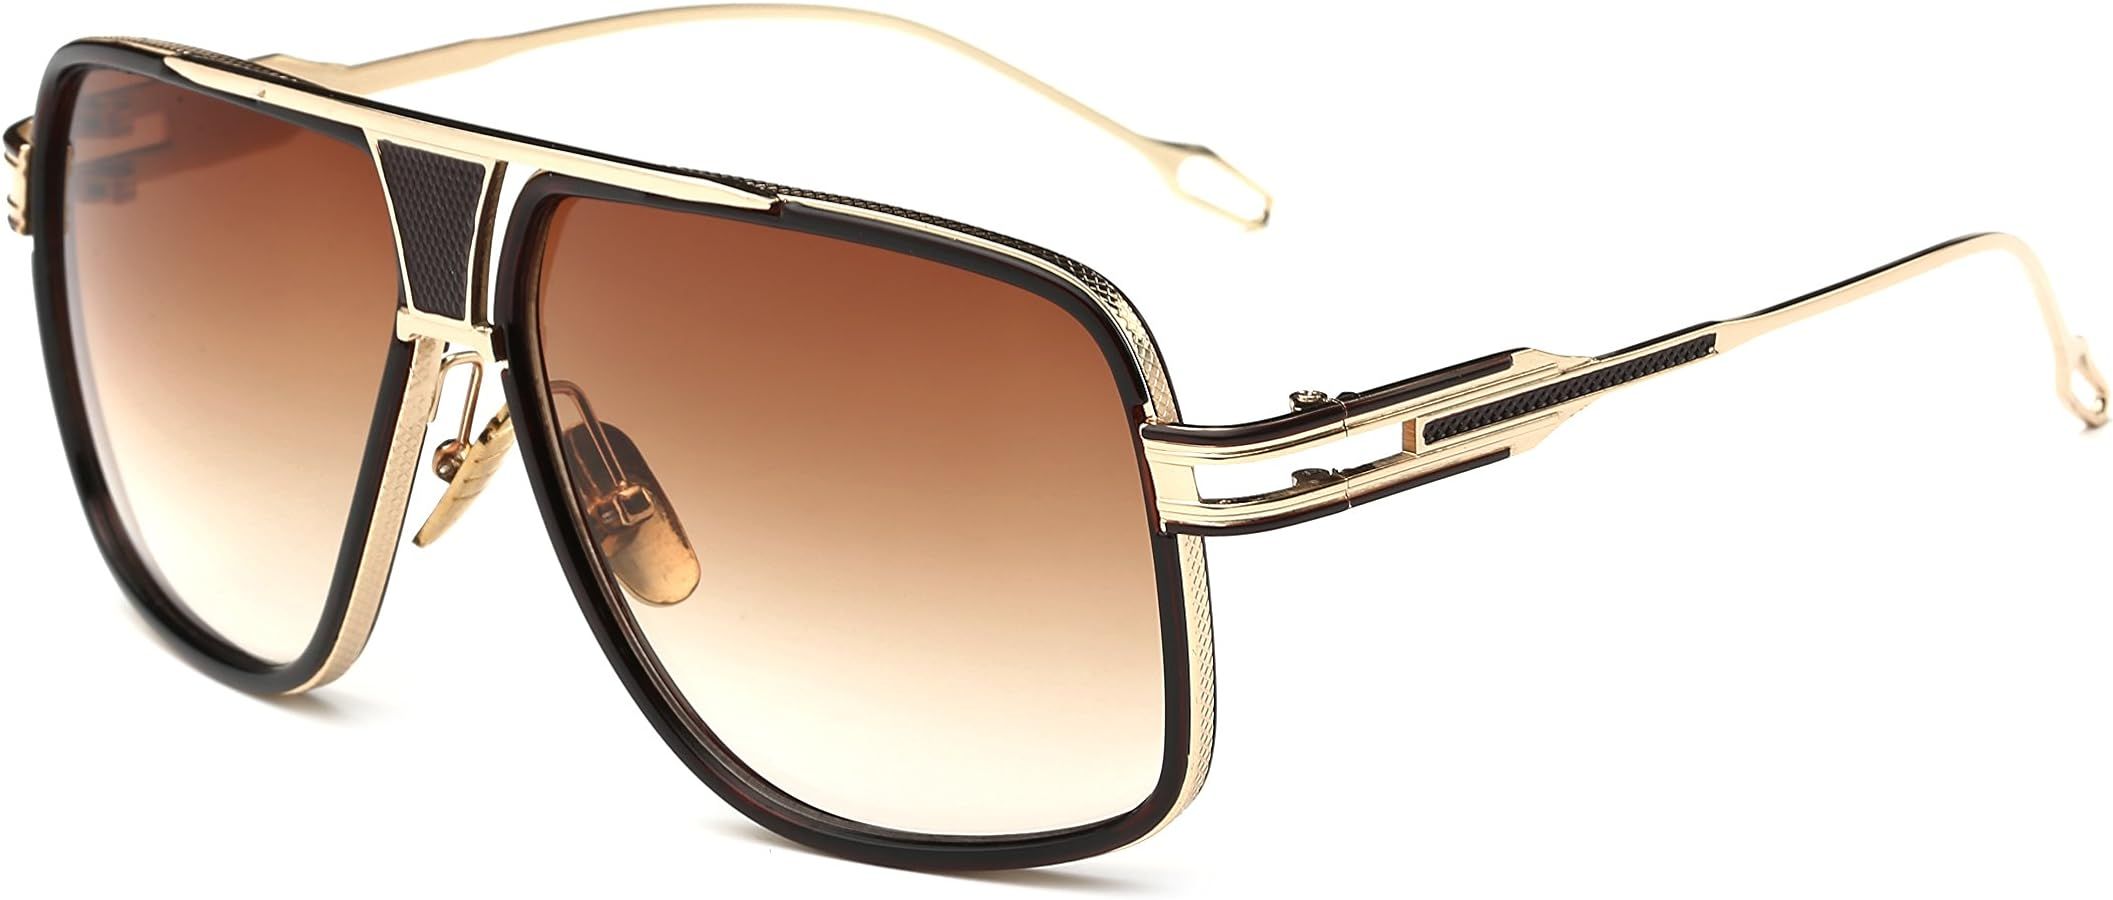 GOBIGER Aviator Sunglasses for Men 100% UV Protection Goggle Alloy Frame with Case | Amazon (US)